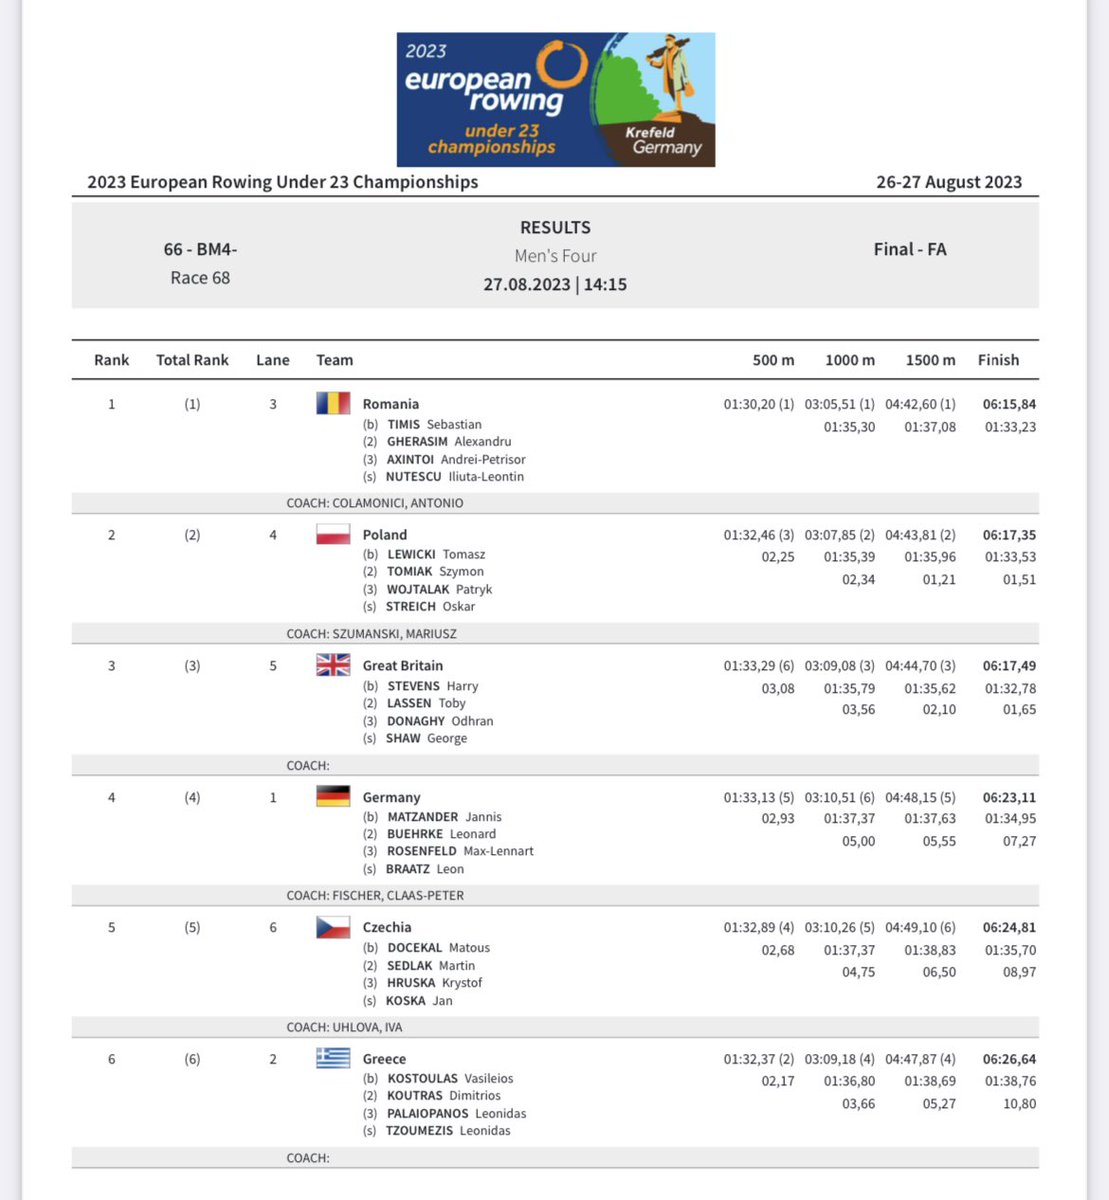 Fantastic bronze medal for the Men’s Four at the U23 European Championships this afternoon. Congratulations to Odhran Donaghy and his @BritishRowing crew mates, we are very proud of your achievements @allmarkone